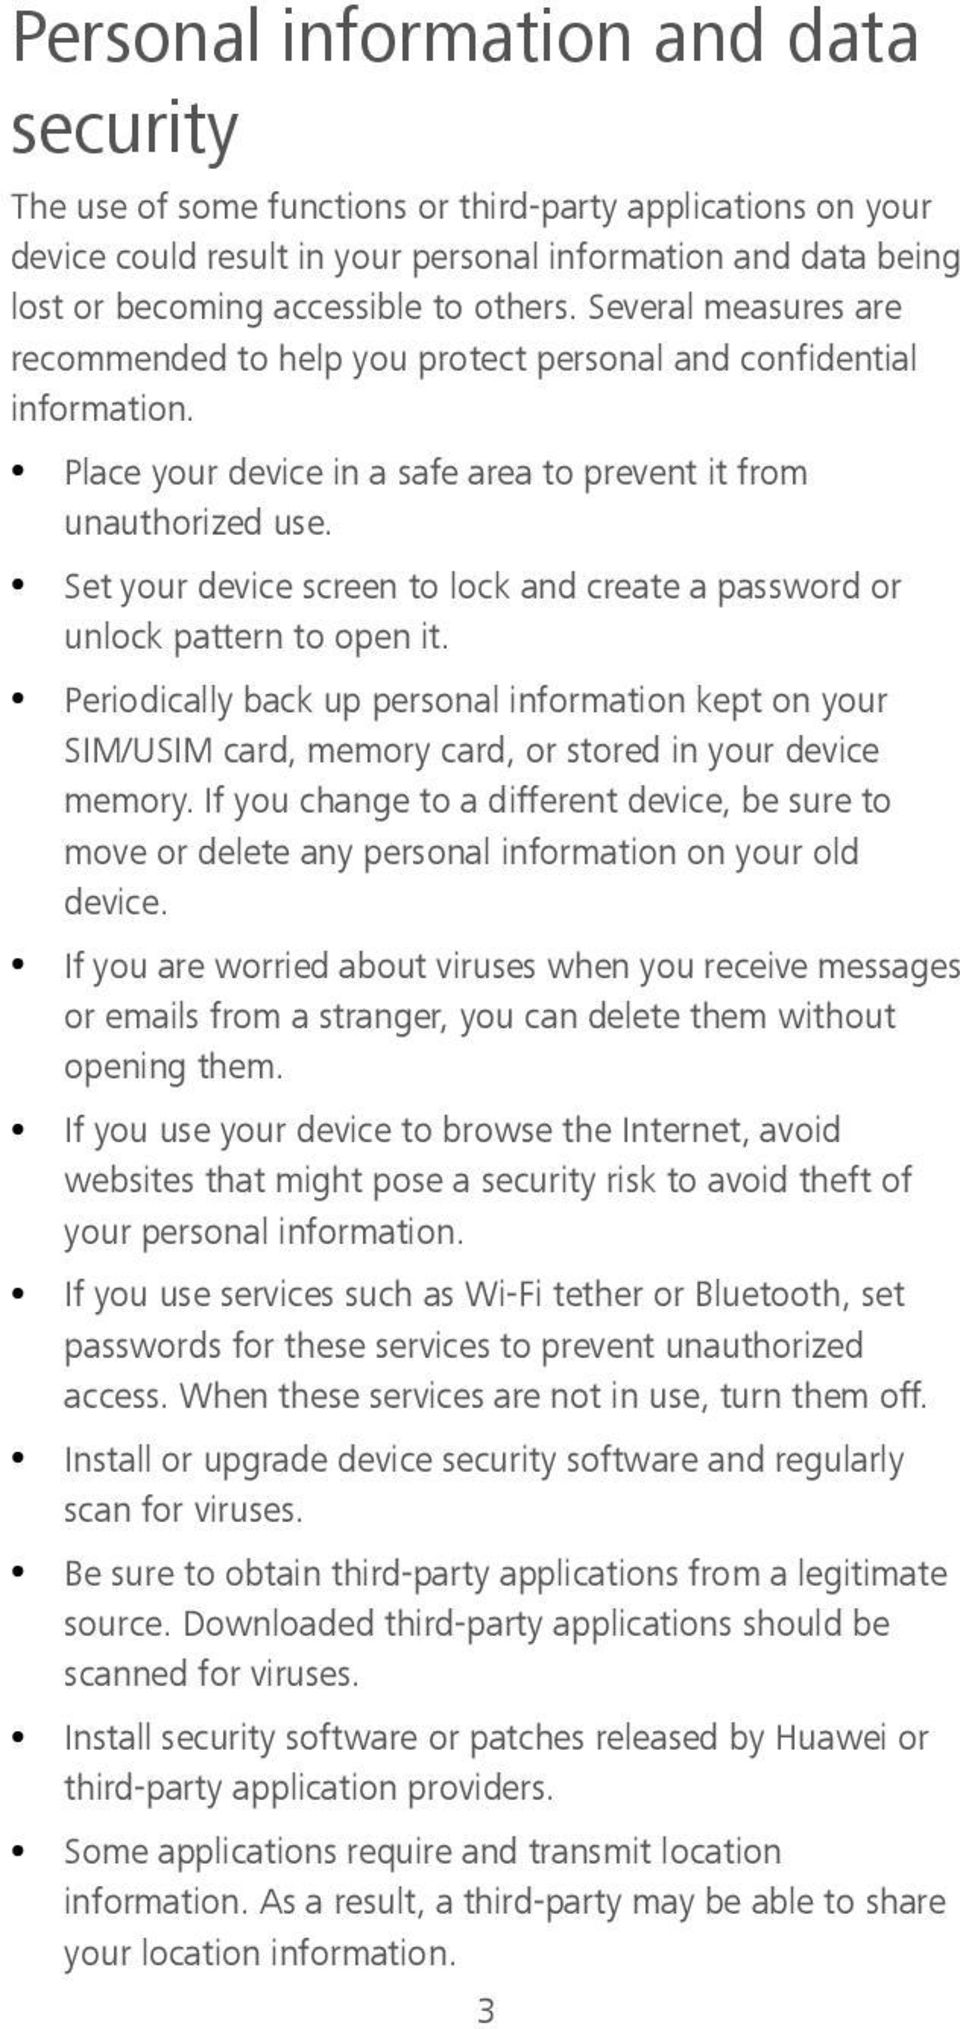 Set your device screen to lock and create a password or unlock pattern to open it. Periodically back up personal information kept on your SIM/USIM card, memory card, or stored in your device memory.